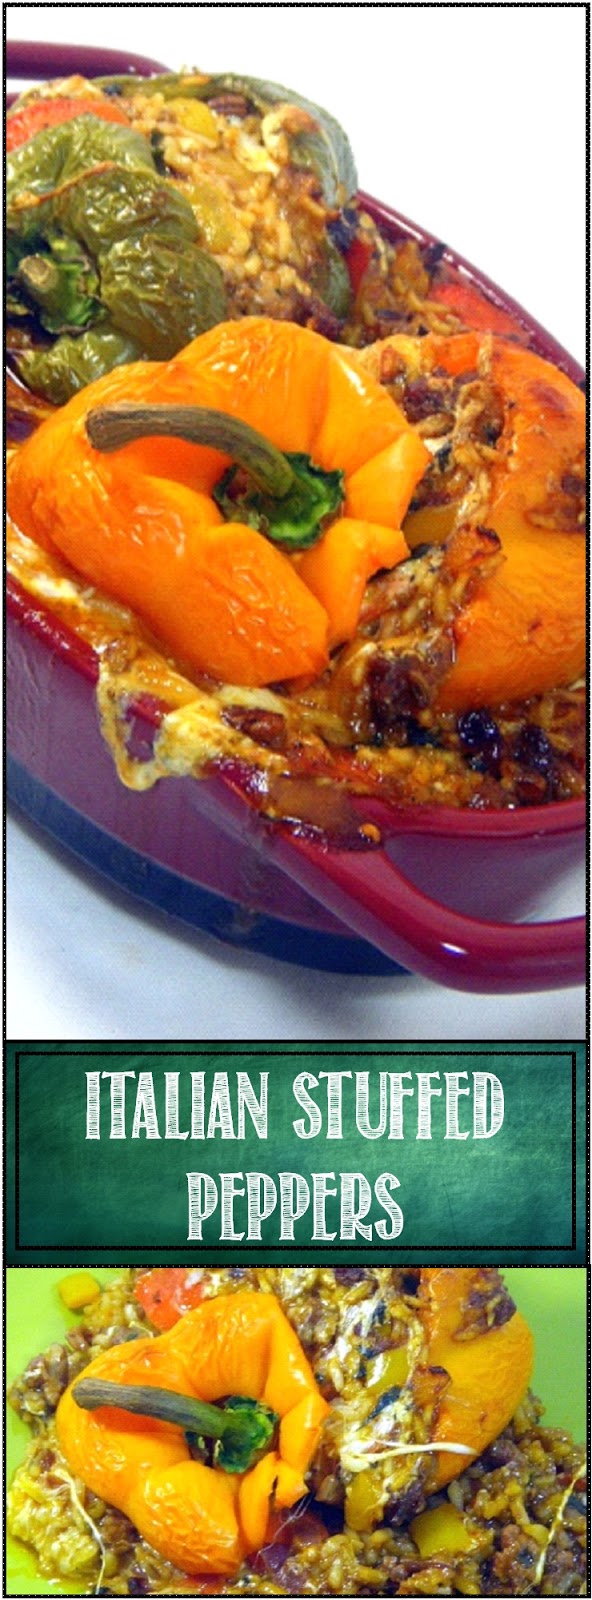 52 Ways to Cook: Italian Stuffed Peppers With Soffritto alla Kansas